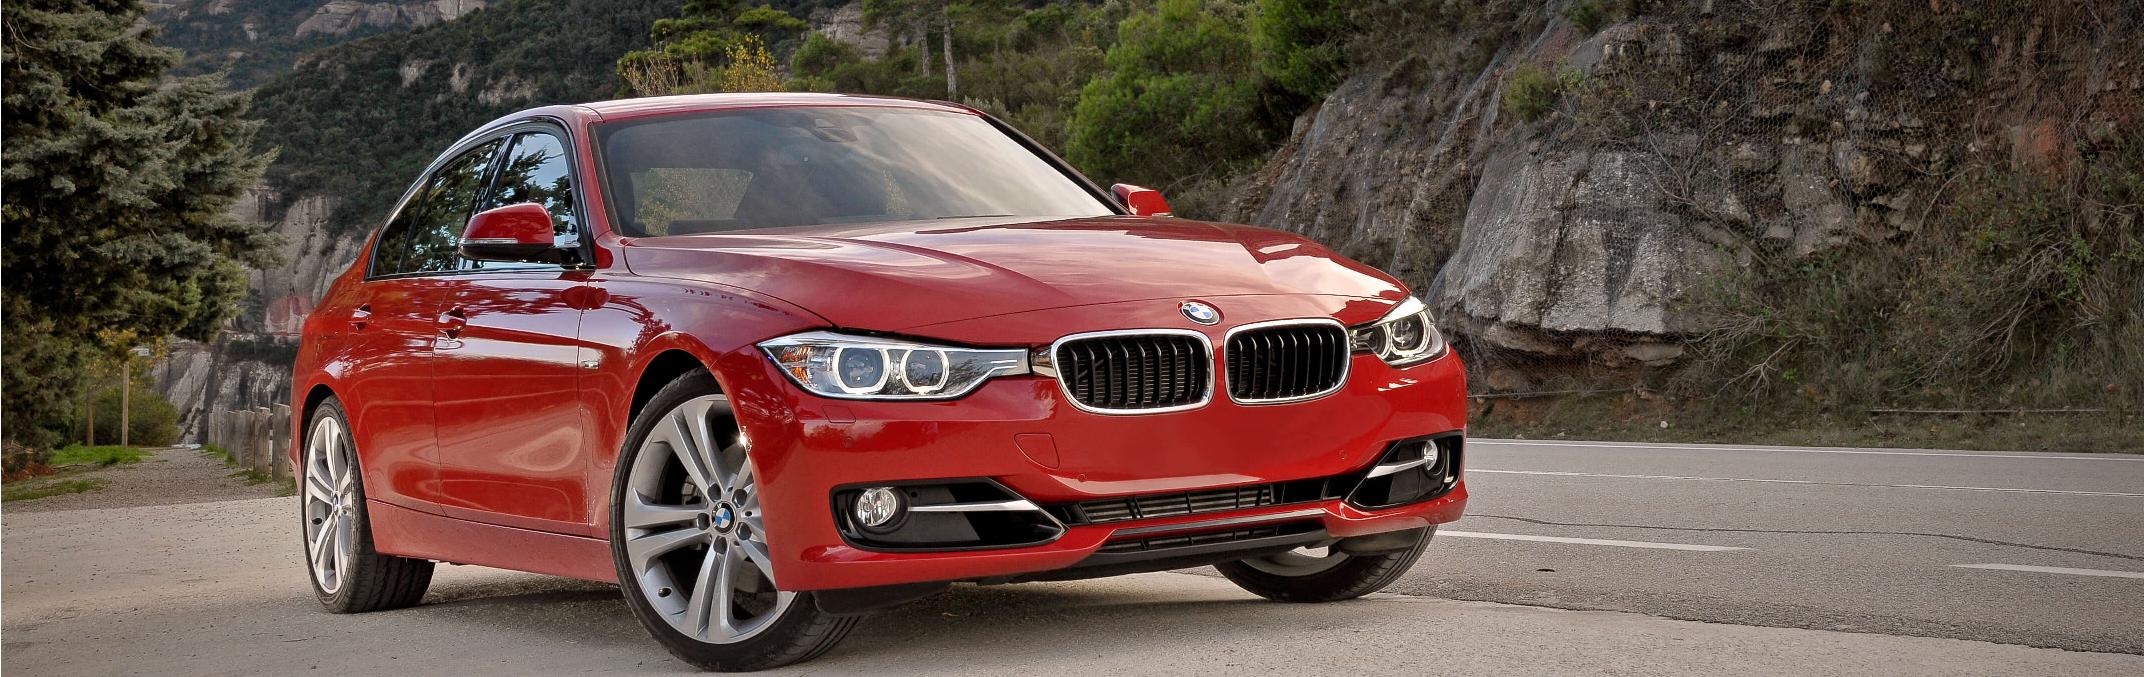 no ASD option in bimmercode? - BMW 3-Series and 4-Series Forum (F30 / F32)